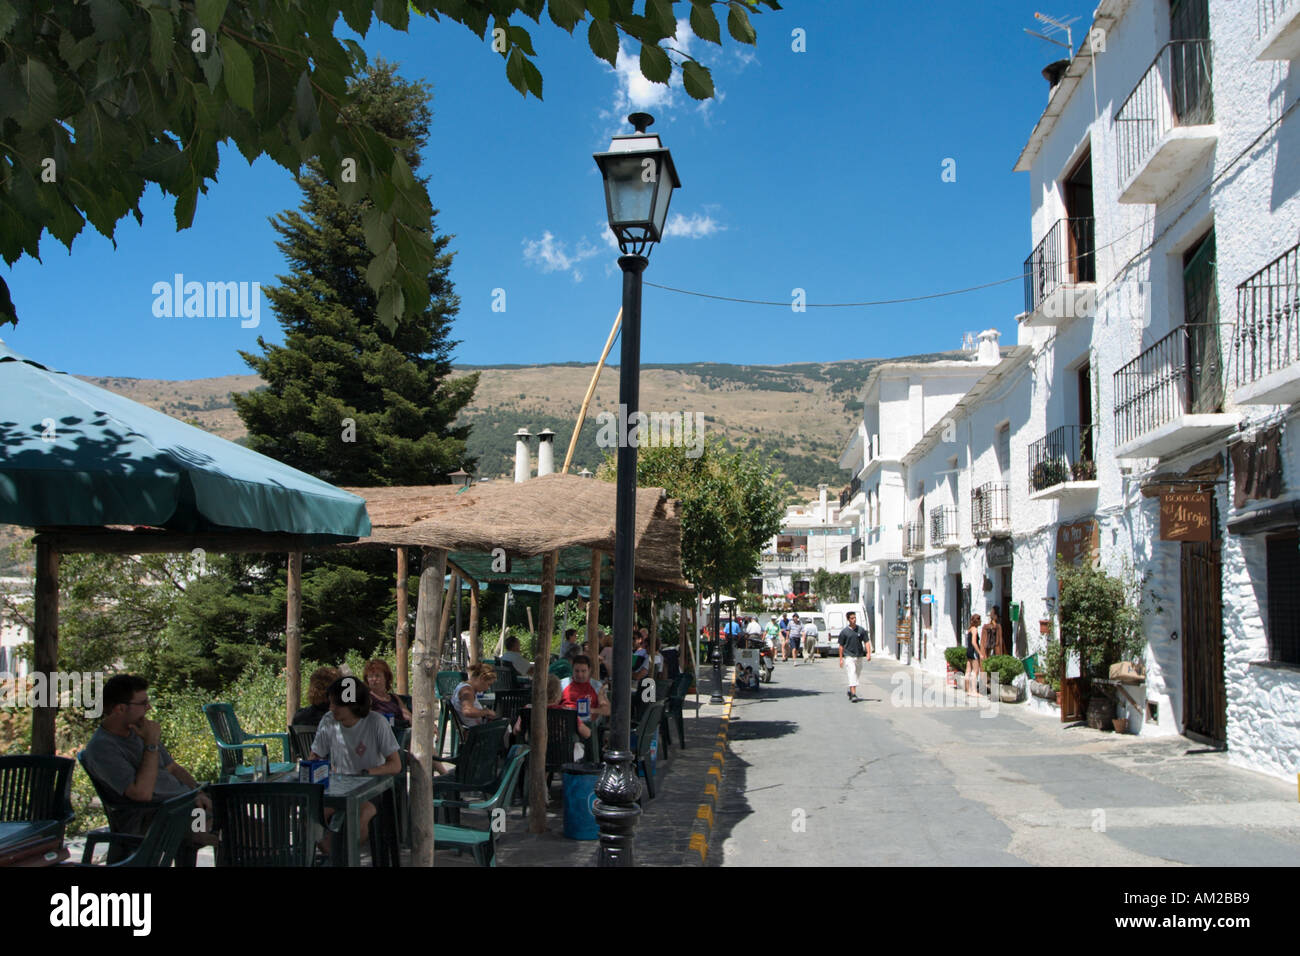 Pavement cafe and shops in the centre of the mountain village of Capileira, Las Alpujarras, Andalucia, Spain Stock Photo